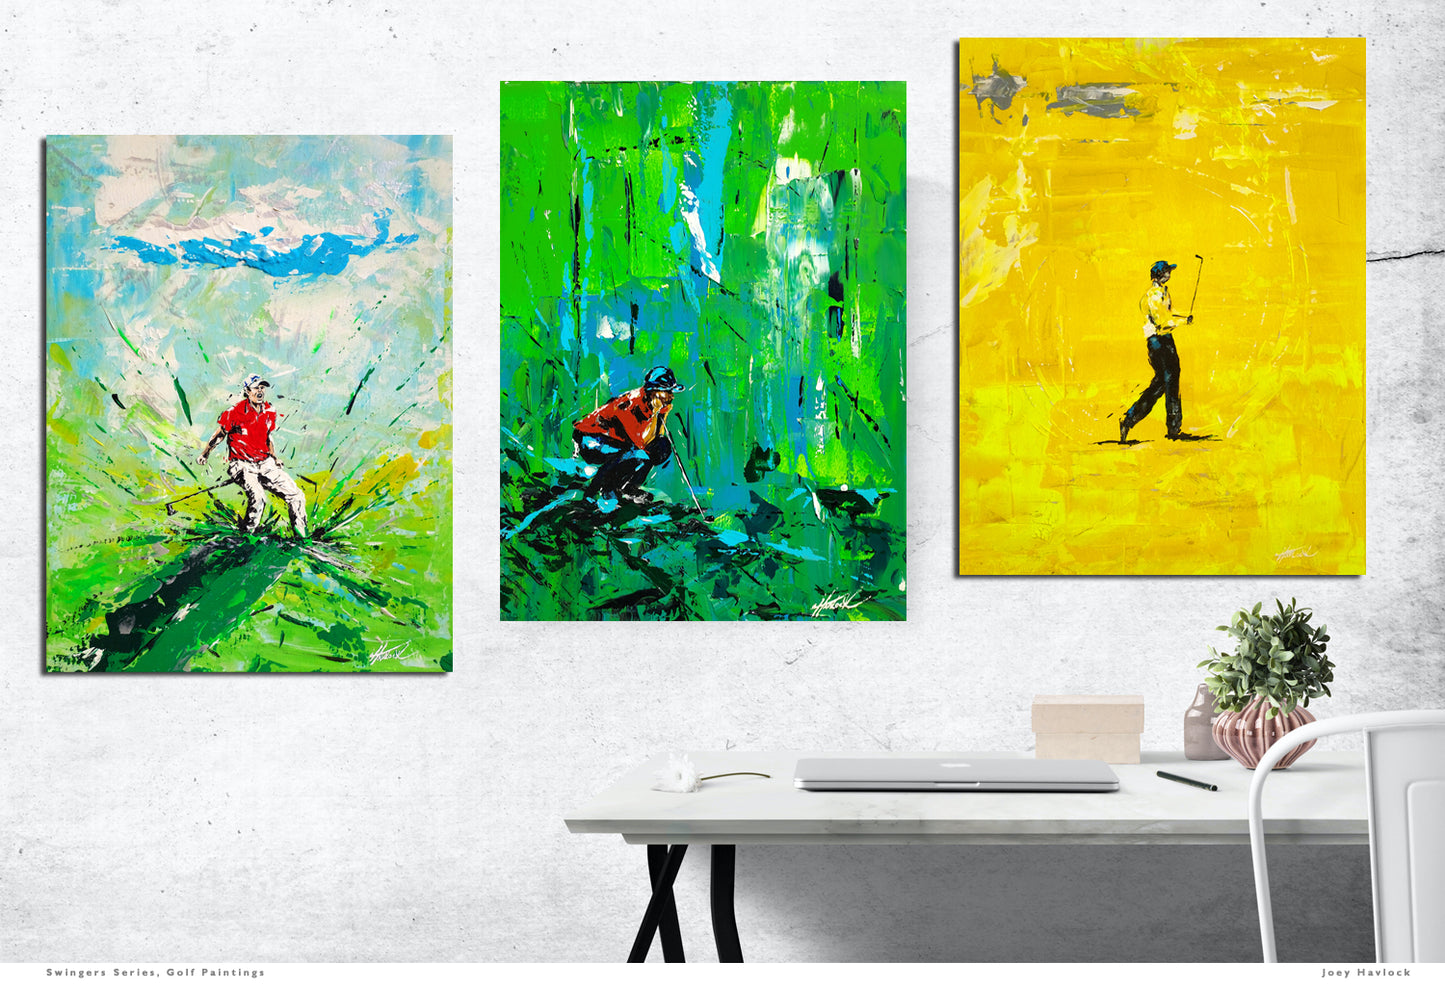 A MOMENT OF ZEN - Metal Print, Limited Edition 9" x 12" - SWINGERS - Impressionist Golf Series by Joey Havlock